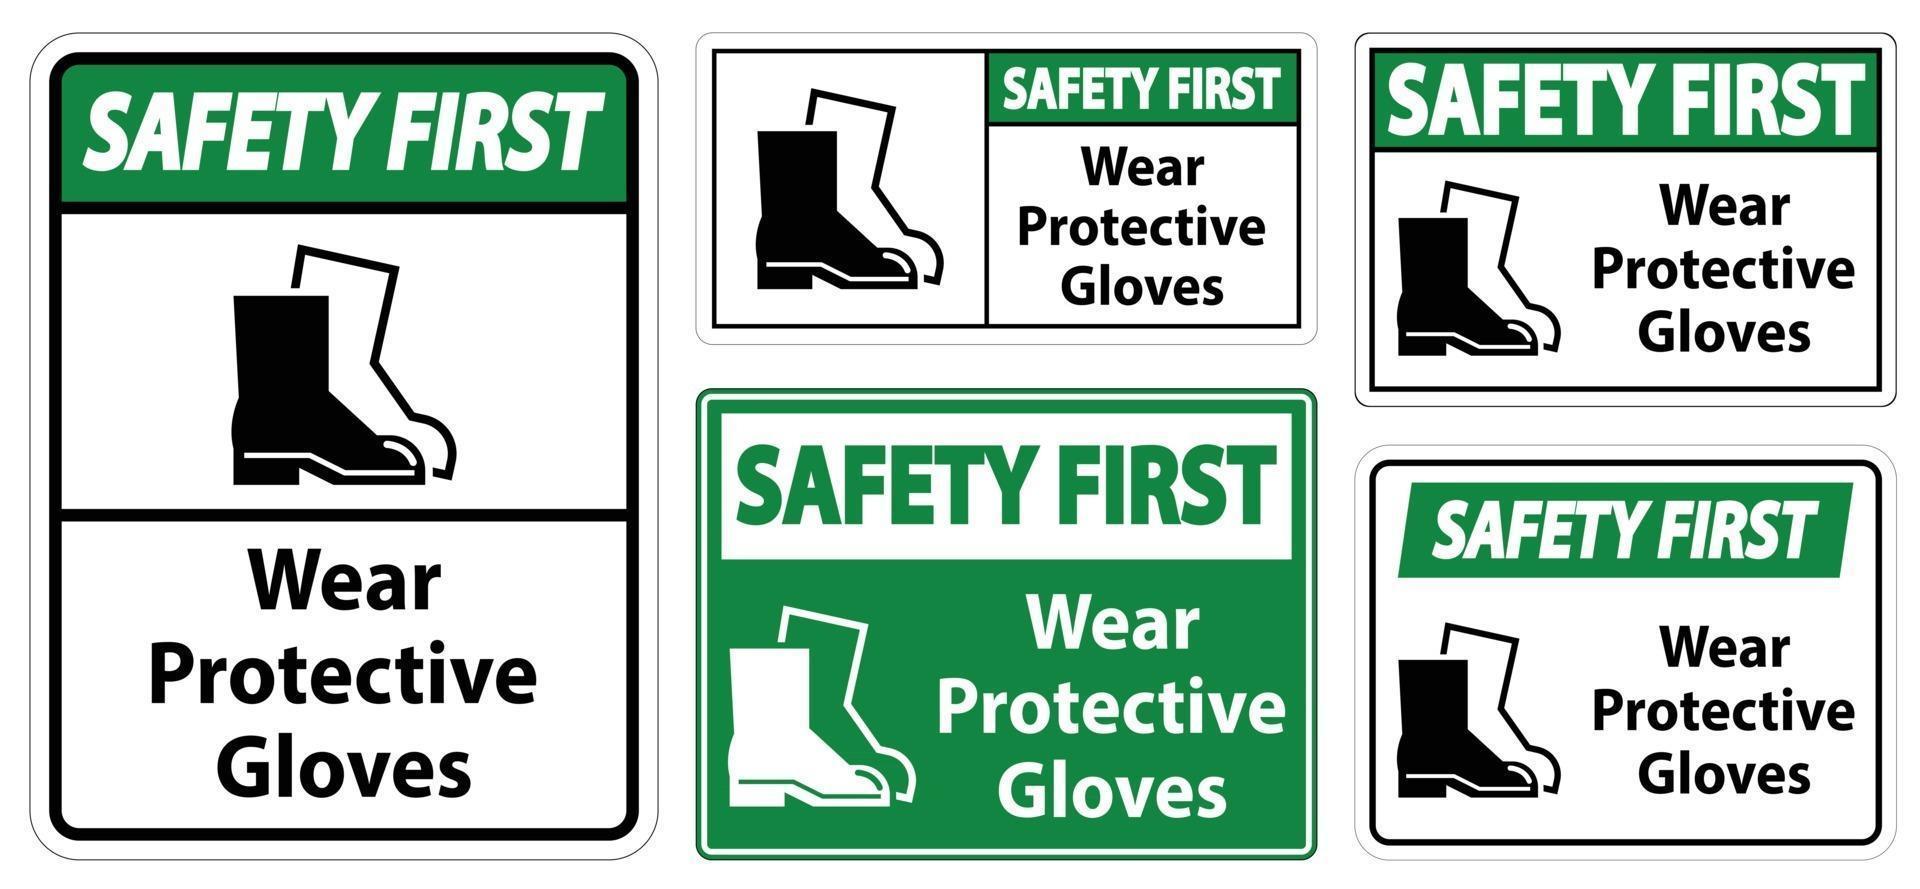 Safety First Wear protective footwear sign on transparent background vector